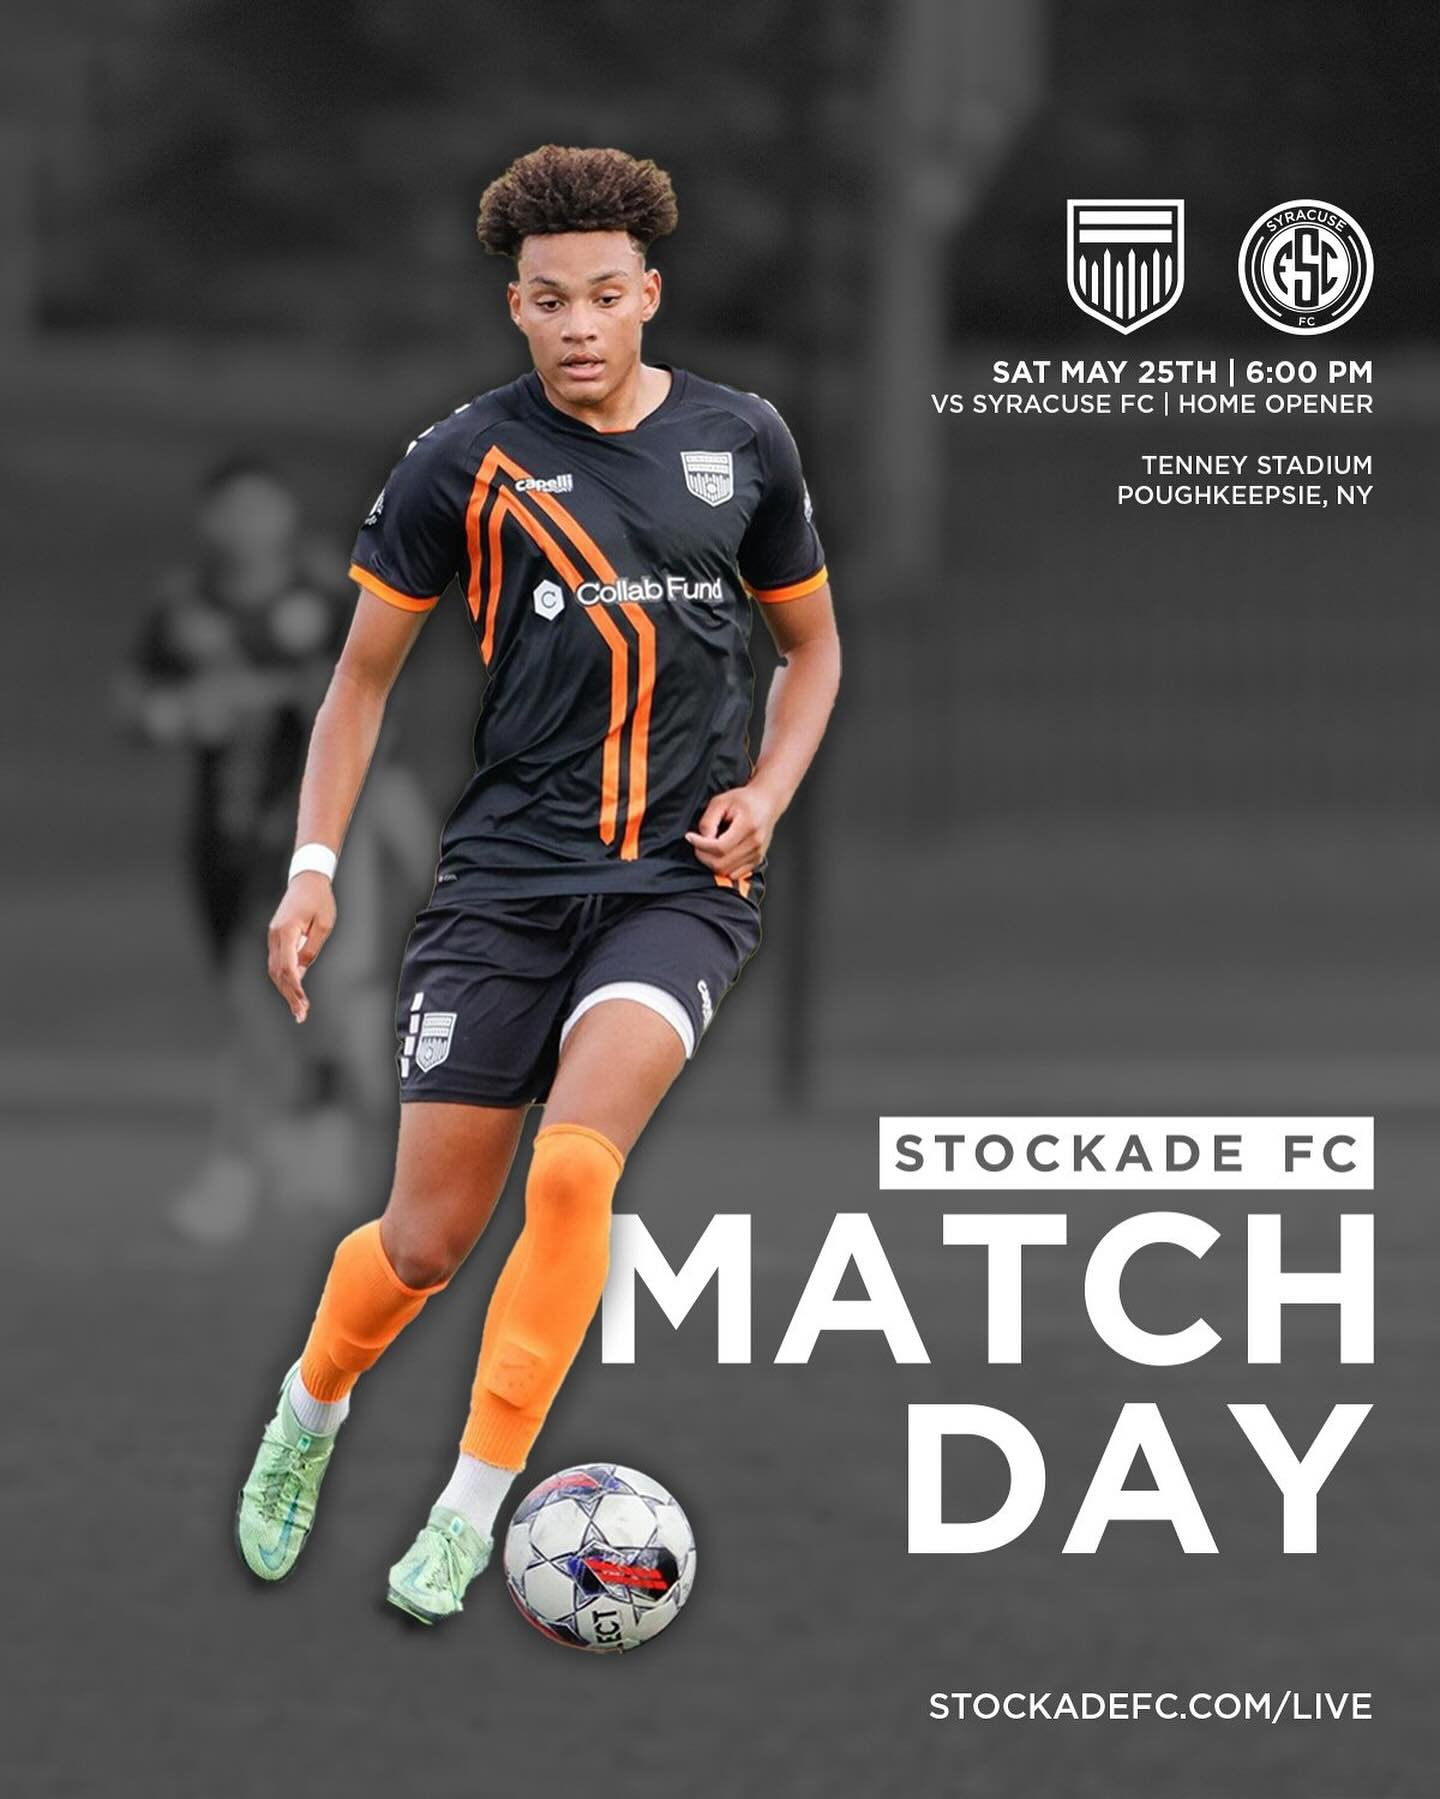 MATCH DAY AT TENNEY! 🏟️

📆 Sat. May 25
⏰ 6PM
🆚 Syracuse FC
🏟️Tenney Stadium (Marist College, Poughkeepsie, NY)
🎥 stockadefc.com/live
🎟️ stockadefc.com/tickets
🍖 Food from @bigebbqny &amp; @thedoghousenewyork 
🍺 Local beers from @keeganales